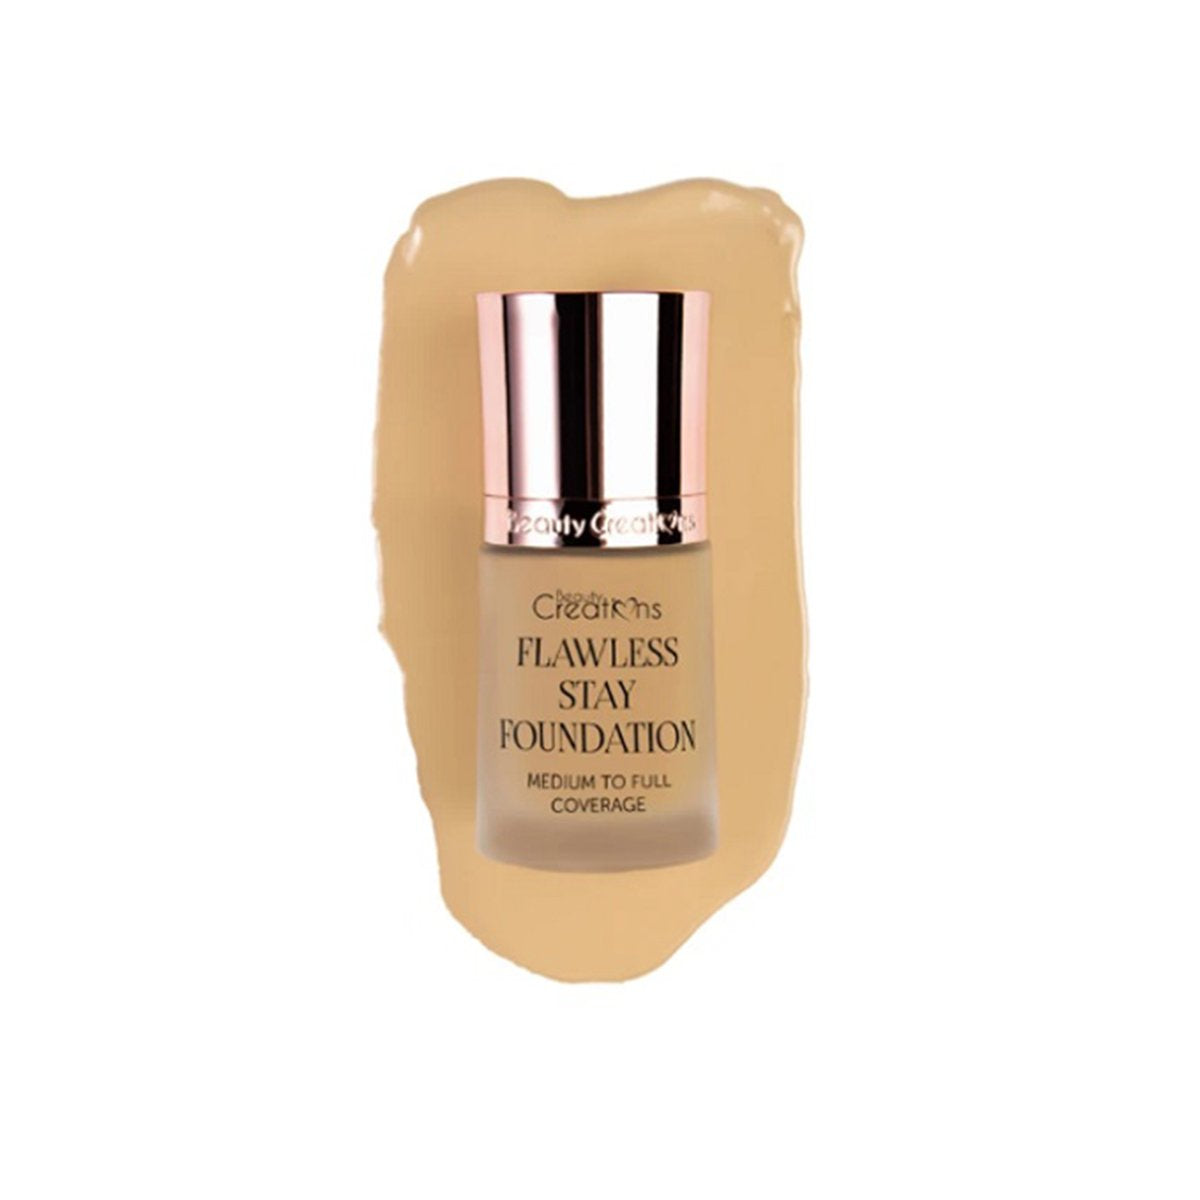 FLAWLESS STAY FOUNDATION 7 - BEAUTY CREATIONS